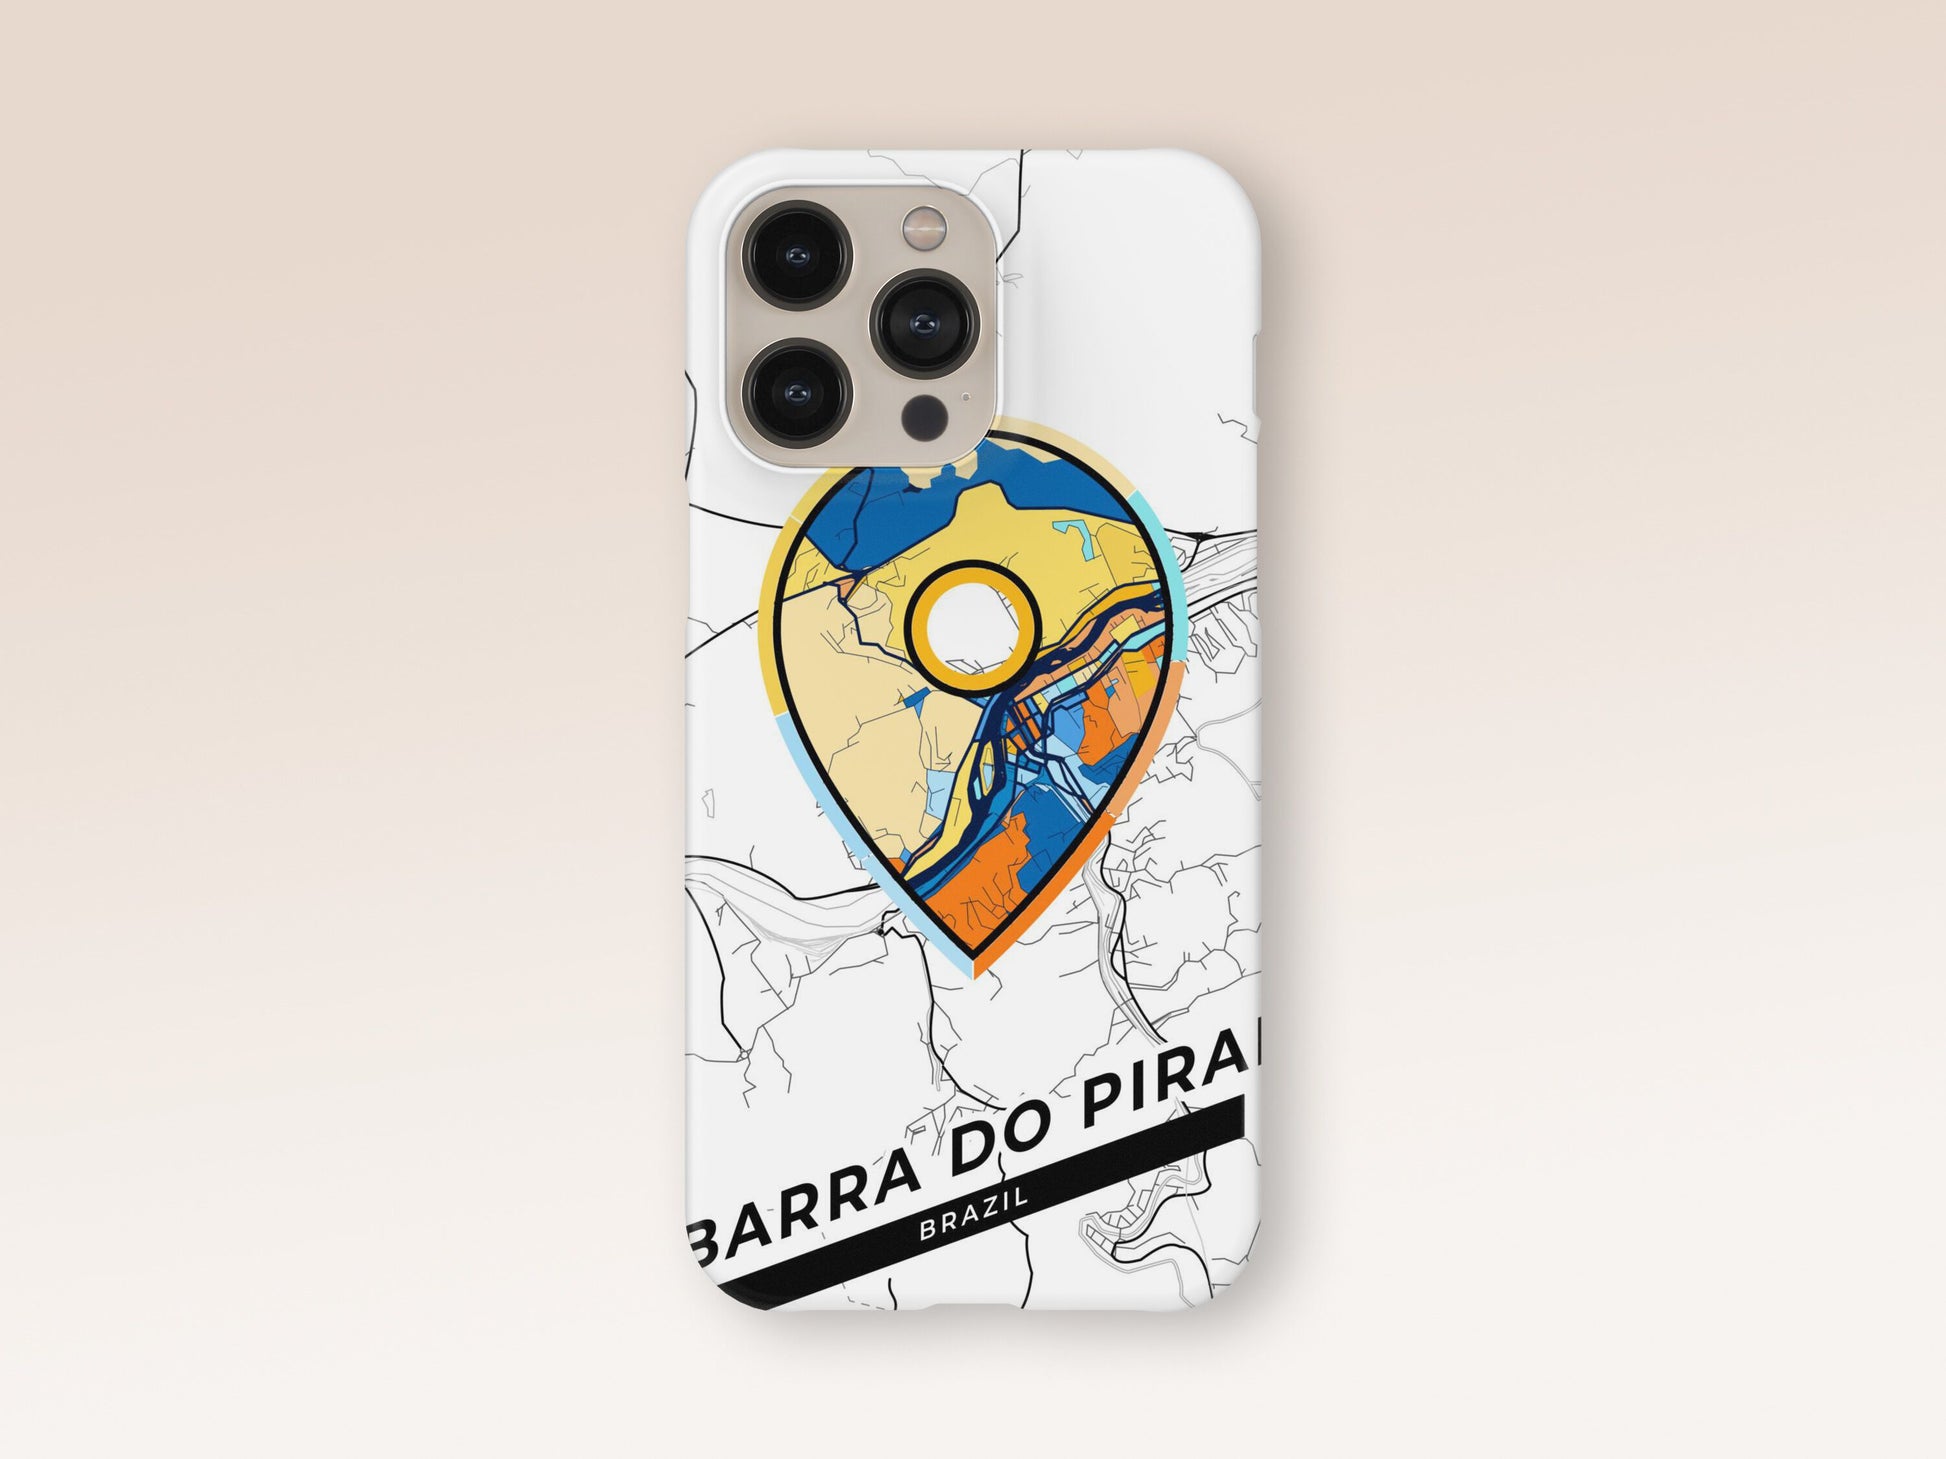 Barra Do Pirai Brazil slim phone case with colorful icon. Birthday, wedding or housewarming gift. Couple match cases. 1